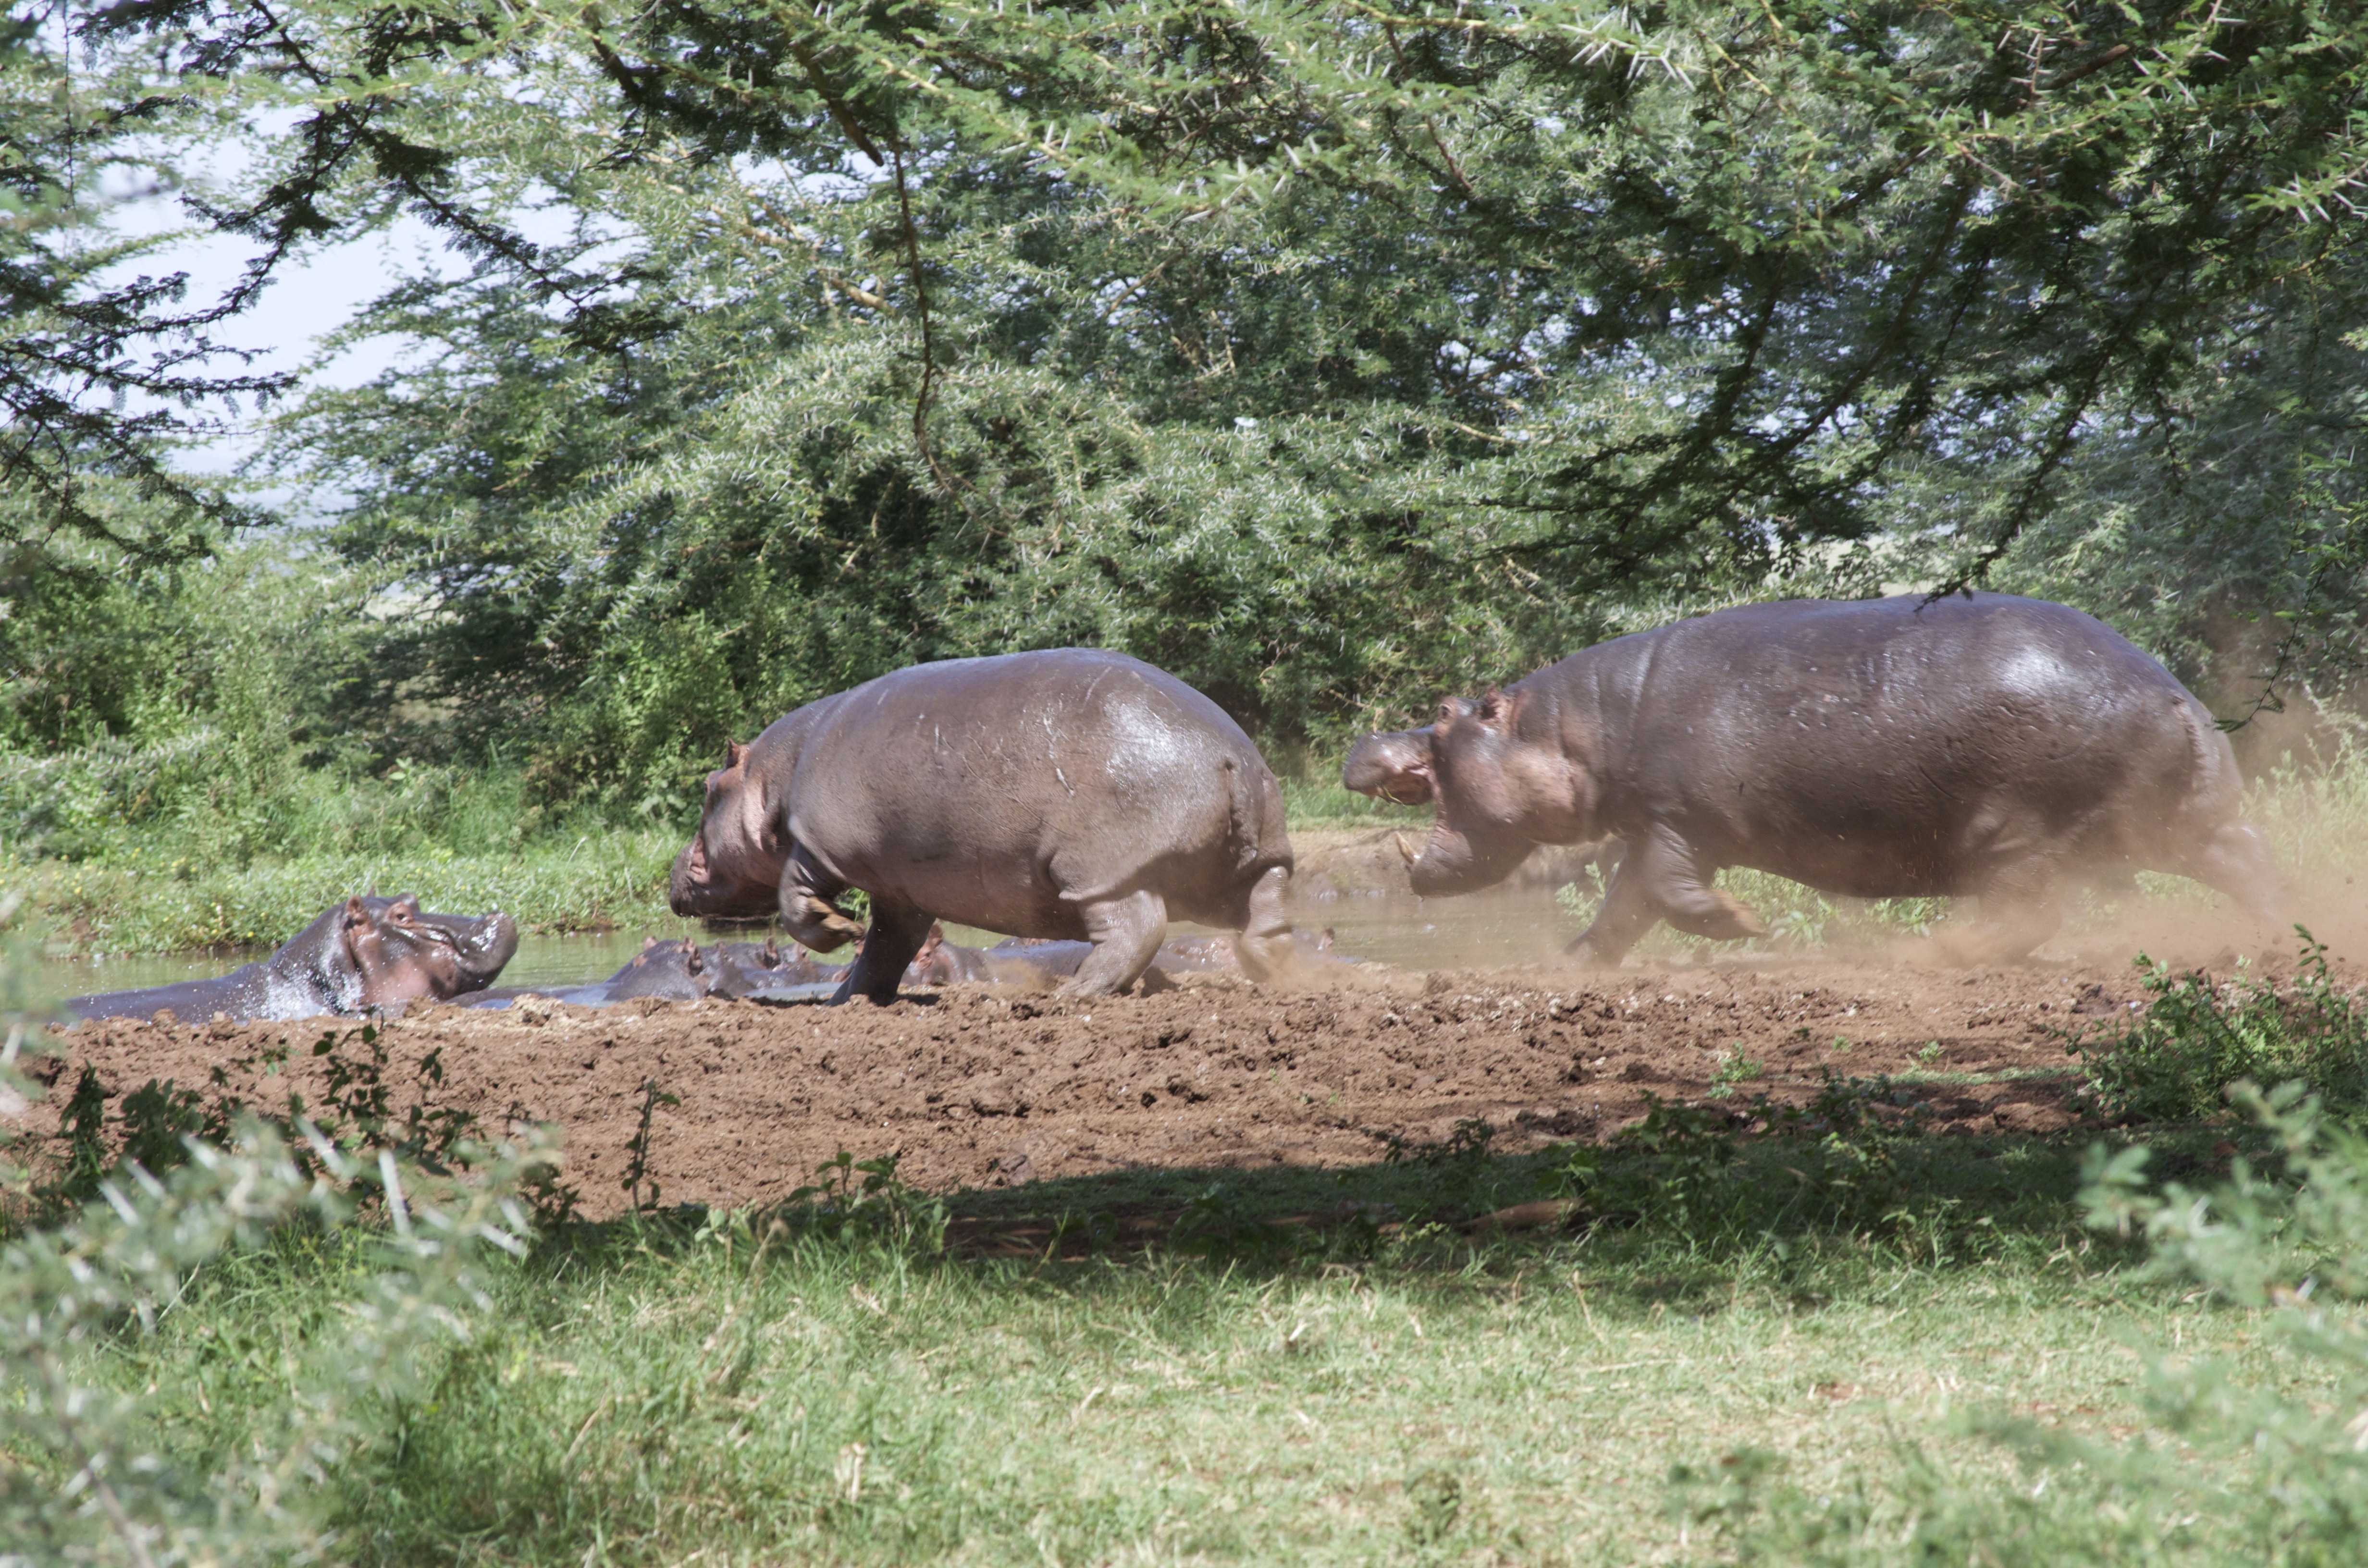 group of hippo running on grass field near trees at daytime